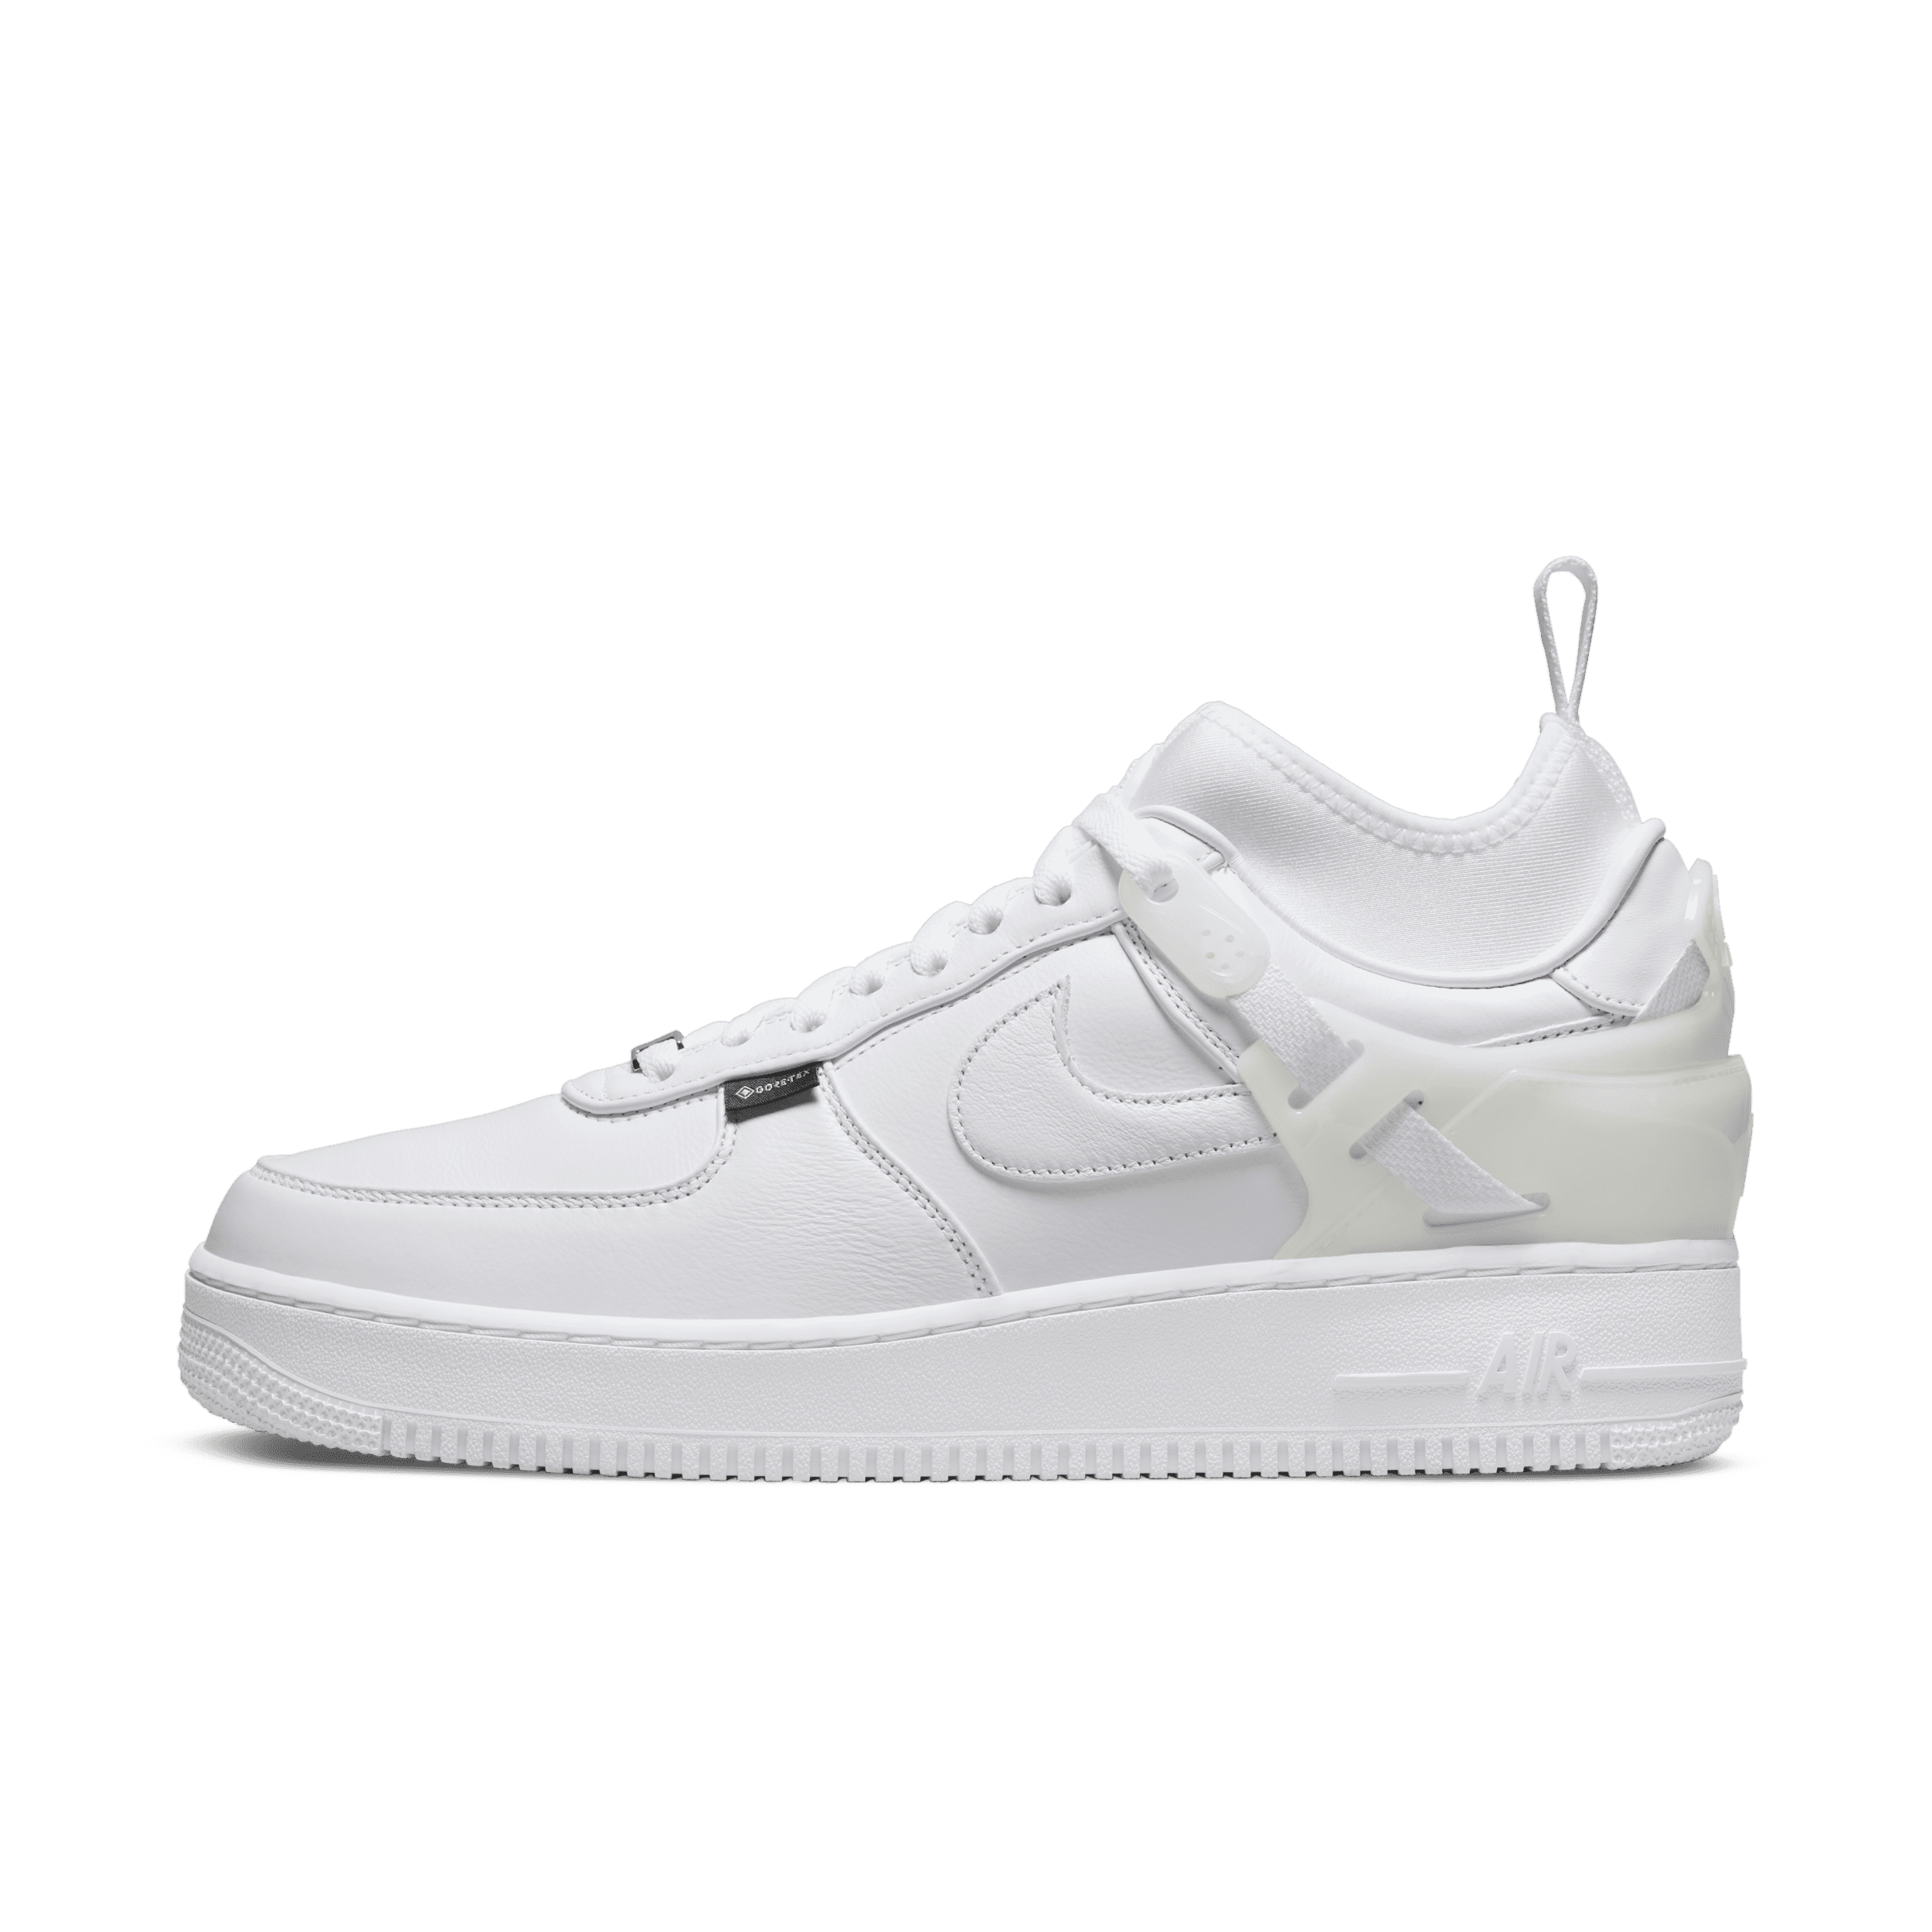 Nike Air Force 1 Low SP x UNDERCOVER Herrenschuh - Weiß